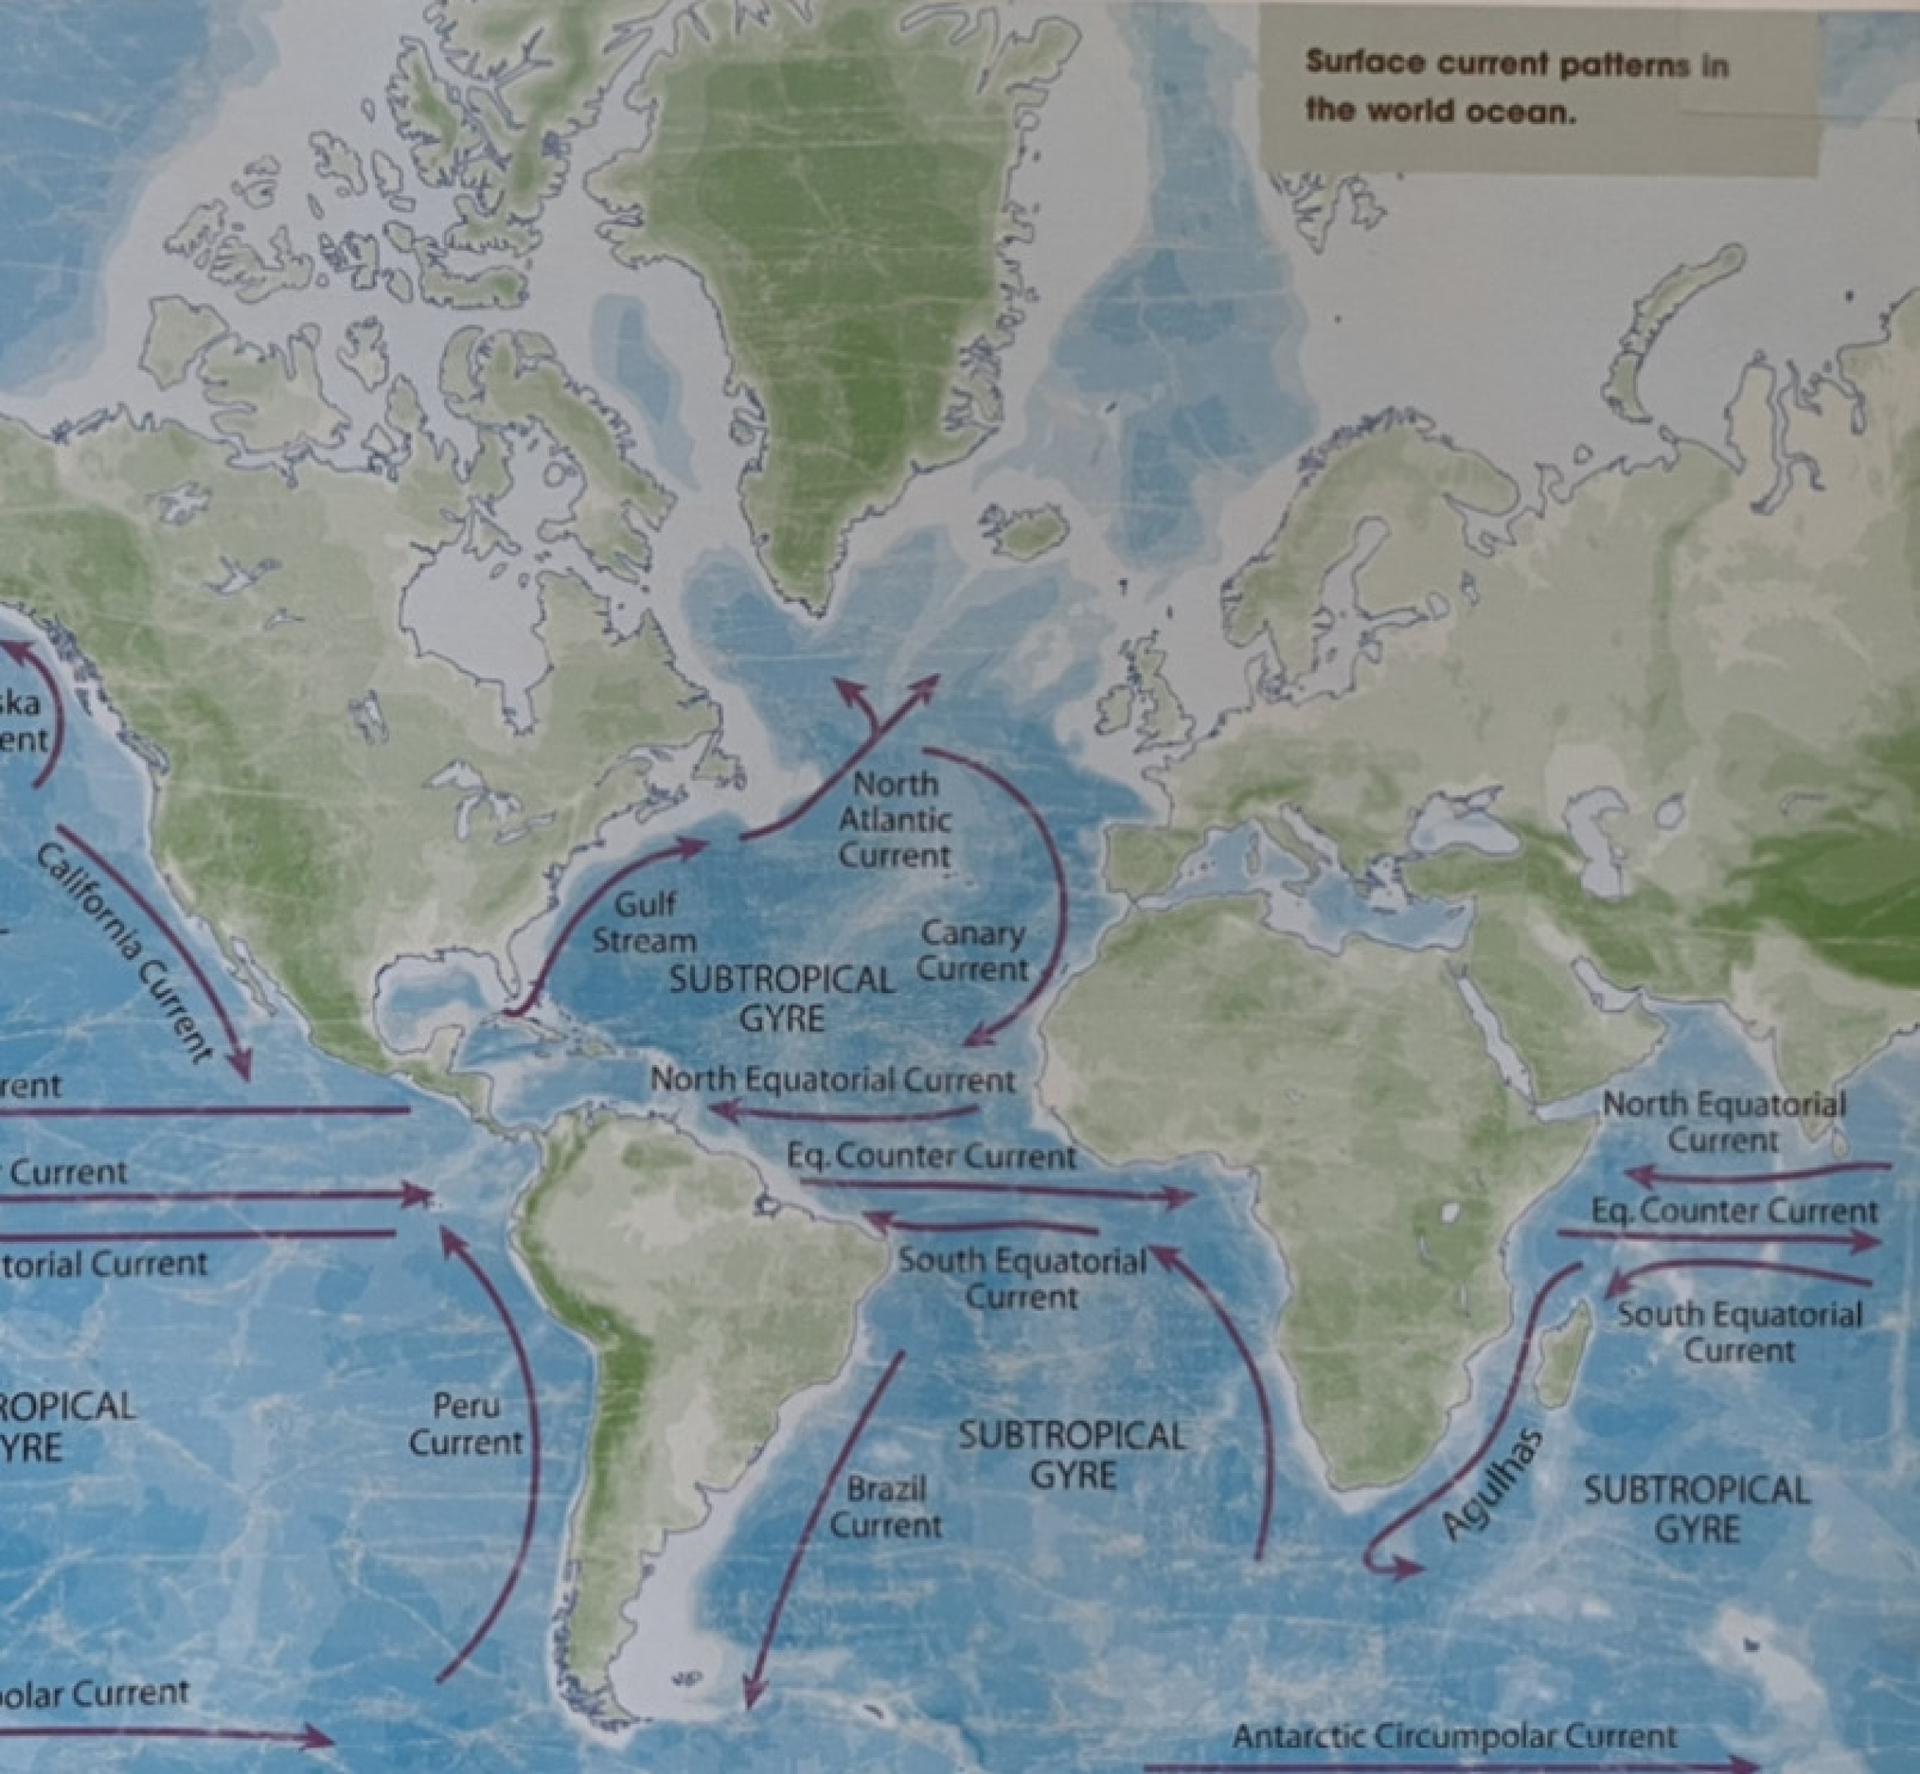 A photo of a book showing ocean current patterns, taken Jul. 30, 2023.